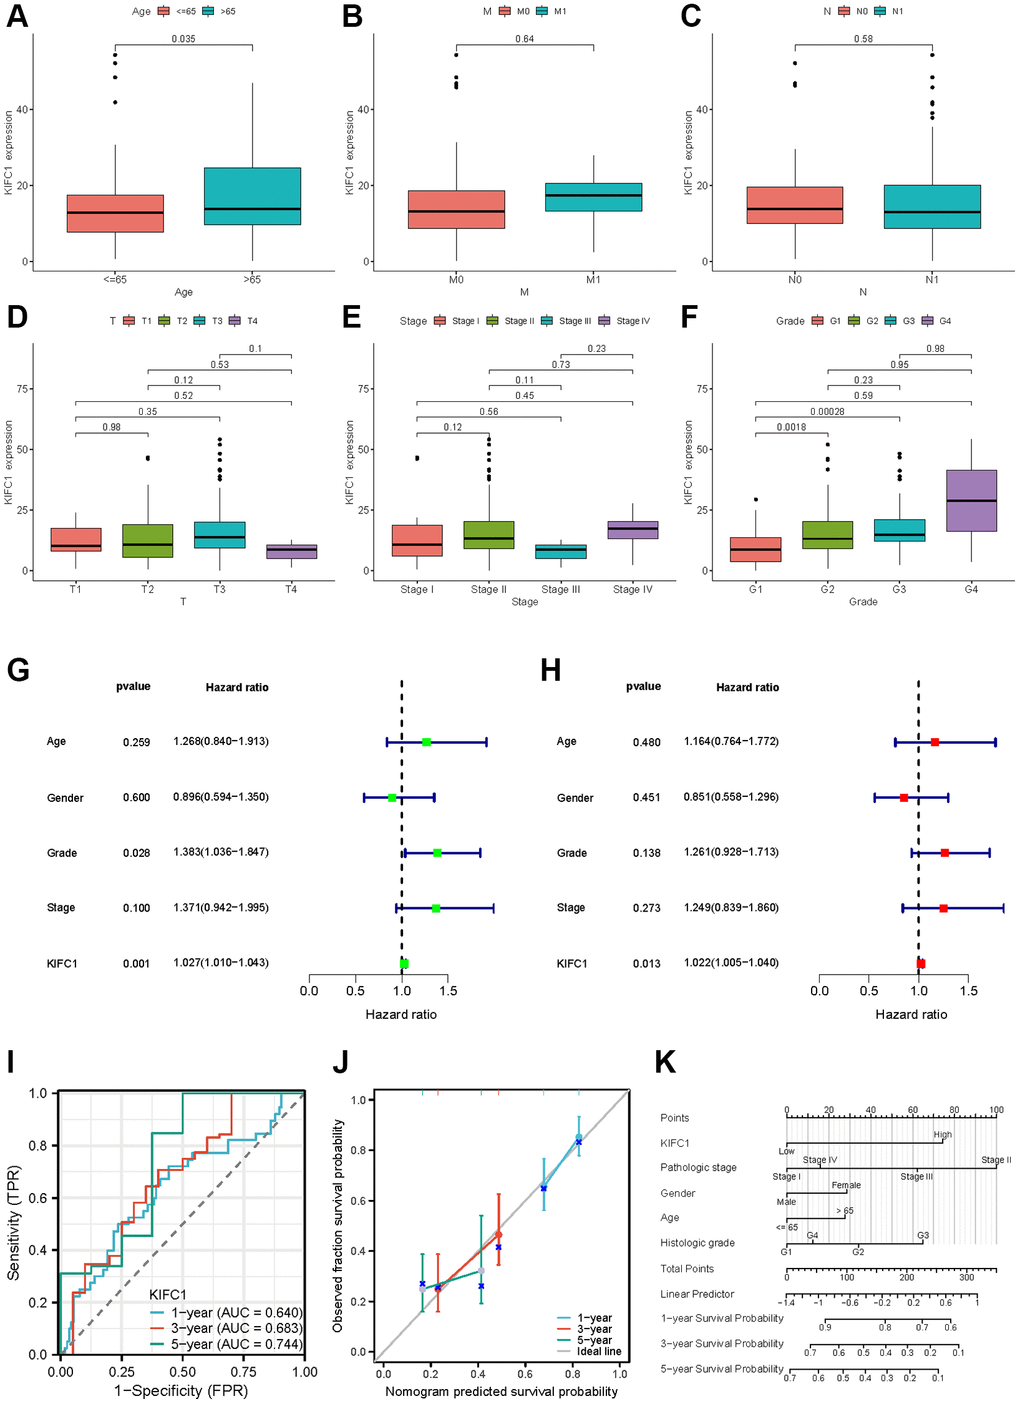 Clinical characteristics of KIFC1 in pancreatic adenocarcinoma. Variation analysis of KIFC1 expression in different Ages (A), M stage (B), N stage (C), T stage (D), pathological stages (E), and histologic grade (F). (G, H) The prognostic significance of KIFC1 in pancreatic cancer was analyzed by univariate and multivariate Cox analysis. (I) Prognostic evaluation efficacy of KIFC1 in pancreatic cancer by ROC. (J) Calibration curve for evaluating the accuracy. (K) A nomogram based on KIFC1 expression and Pathological stage, Gender, Age, and Histologic grade. Ns: p ≥0.05; *p **p ***p ****p 